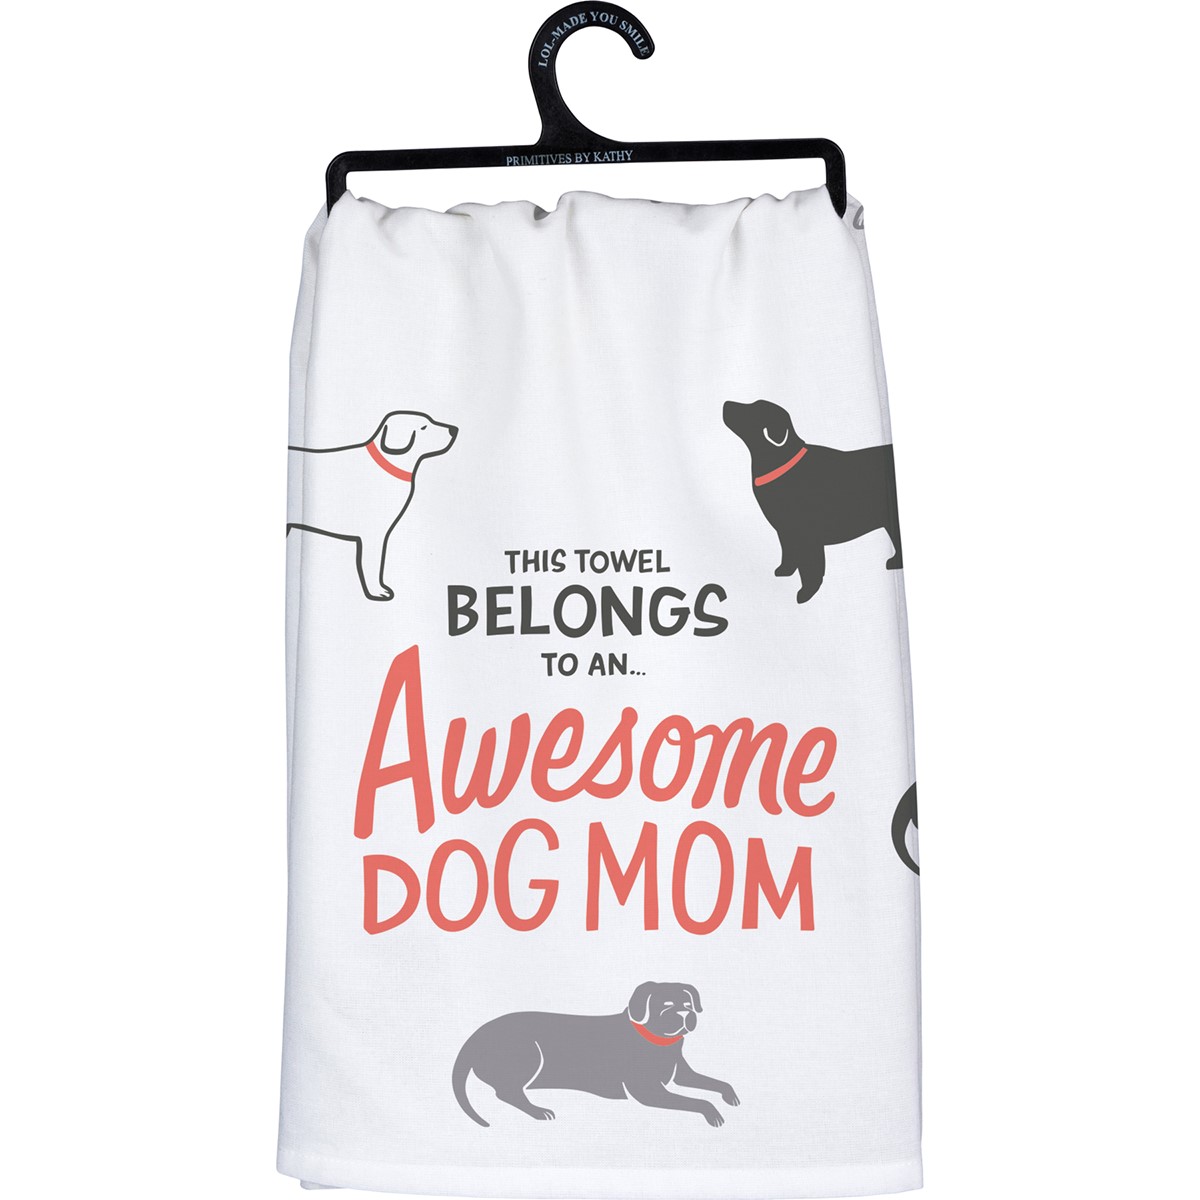 Awesome Dog Mom Kitchen Towel - Cotton